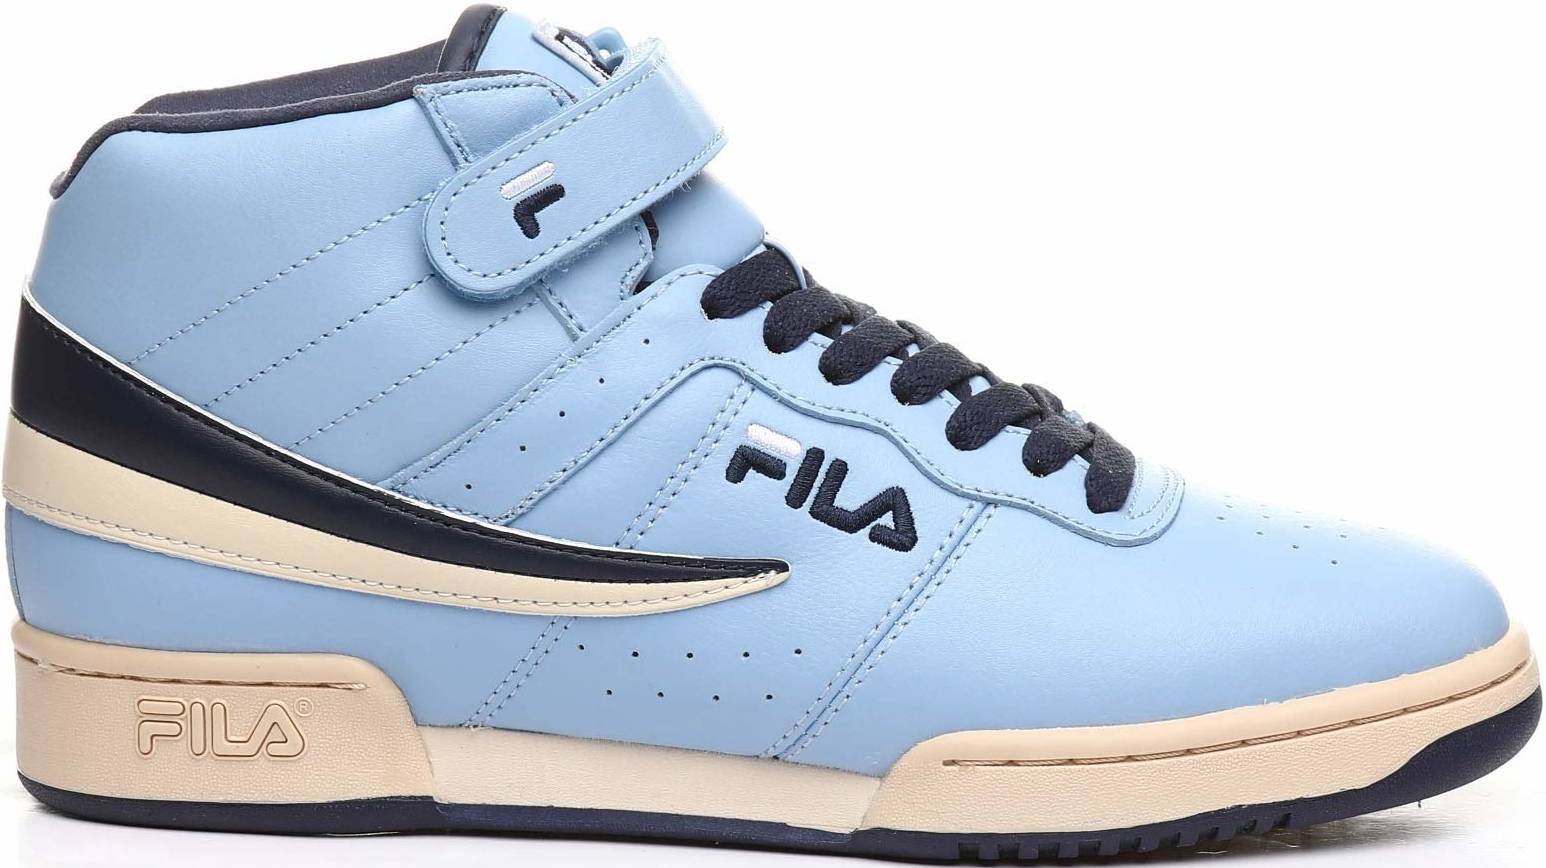 Only $35 + Review of Fila F-13 | RunRepeat